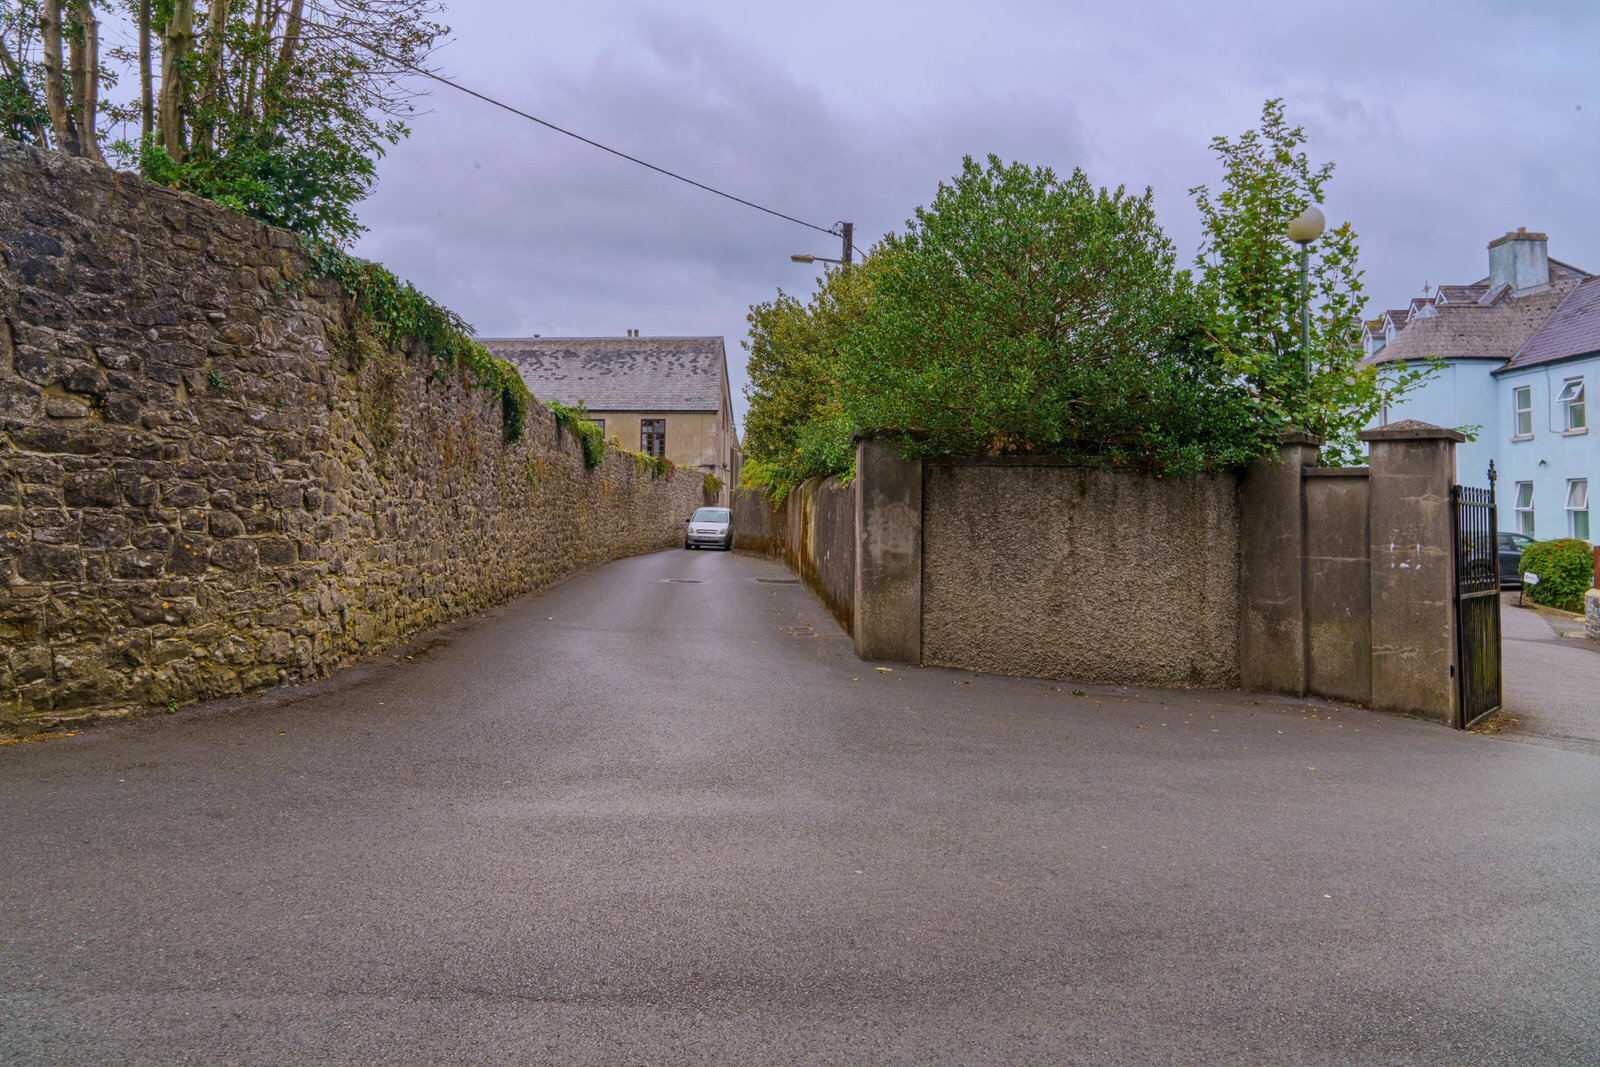 IN 2018 I EXPLORED A NARROW LANE NETWORK IN KILKENNY [DEAN STREET TO BUTT'S GREEN]-234270-1